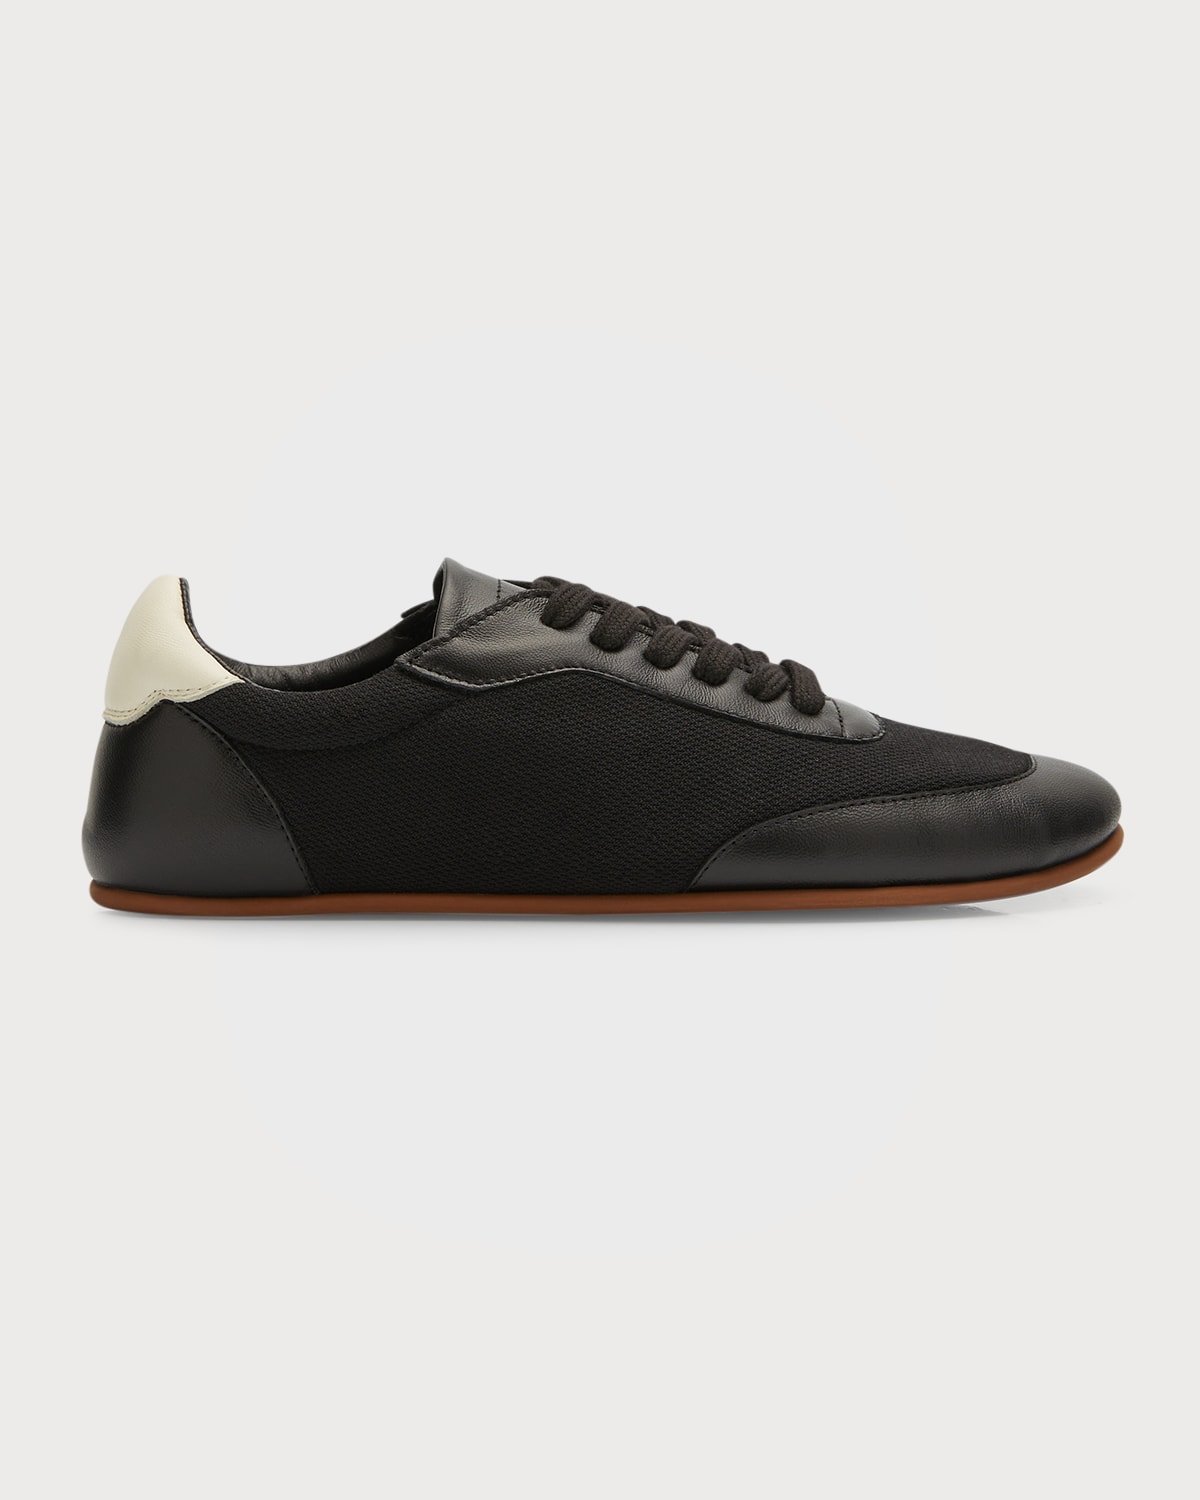 THE ROW Owen City Napa Leather & Canvas Sneakers